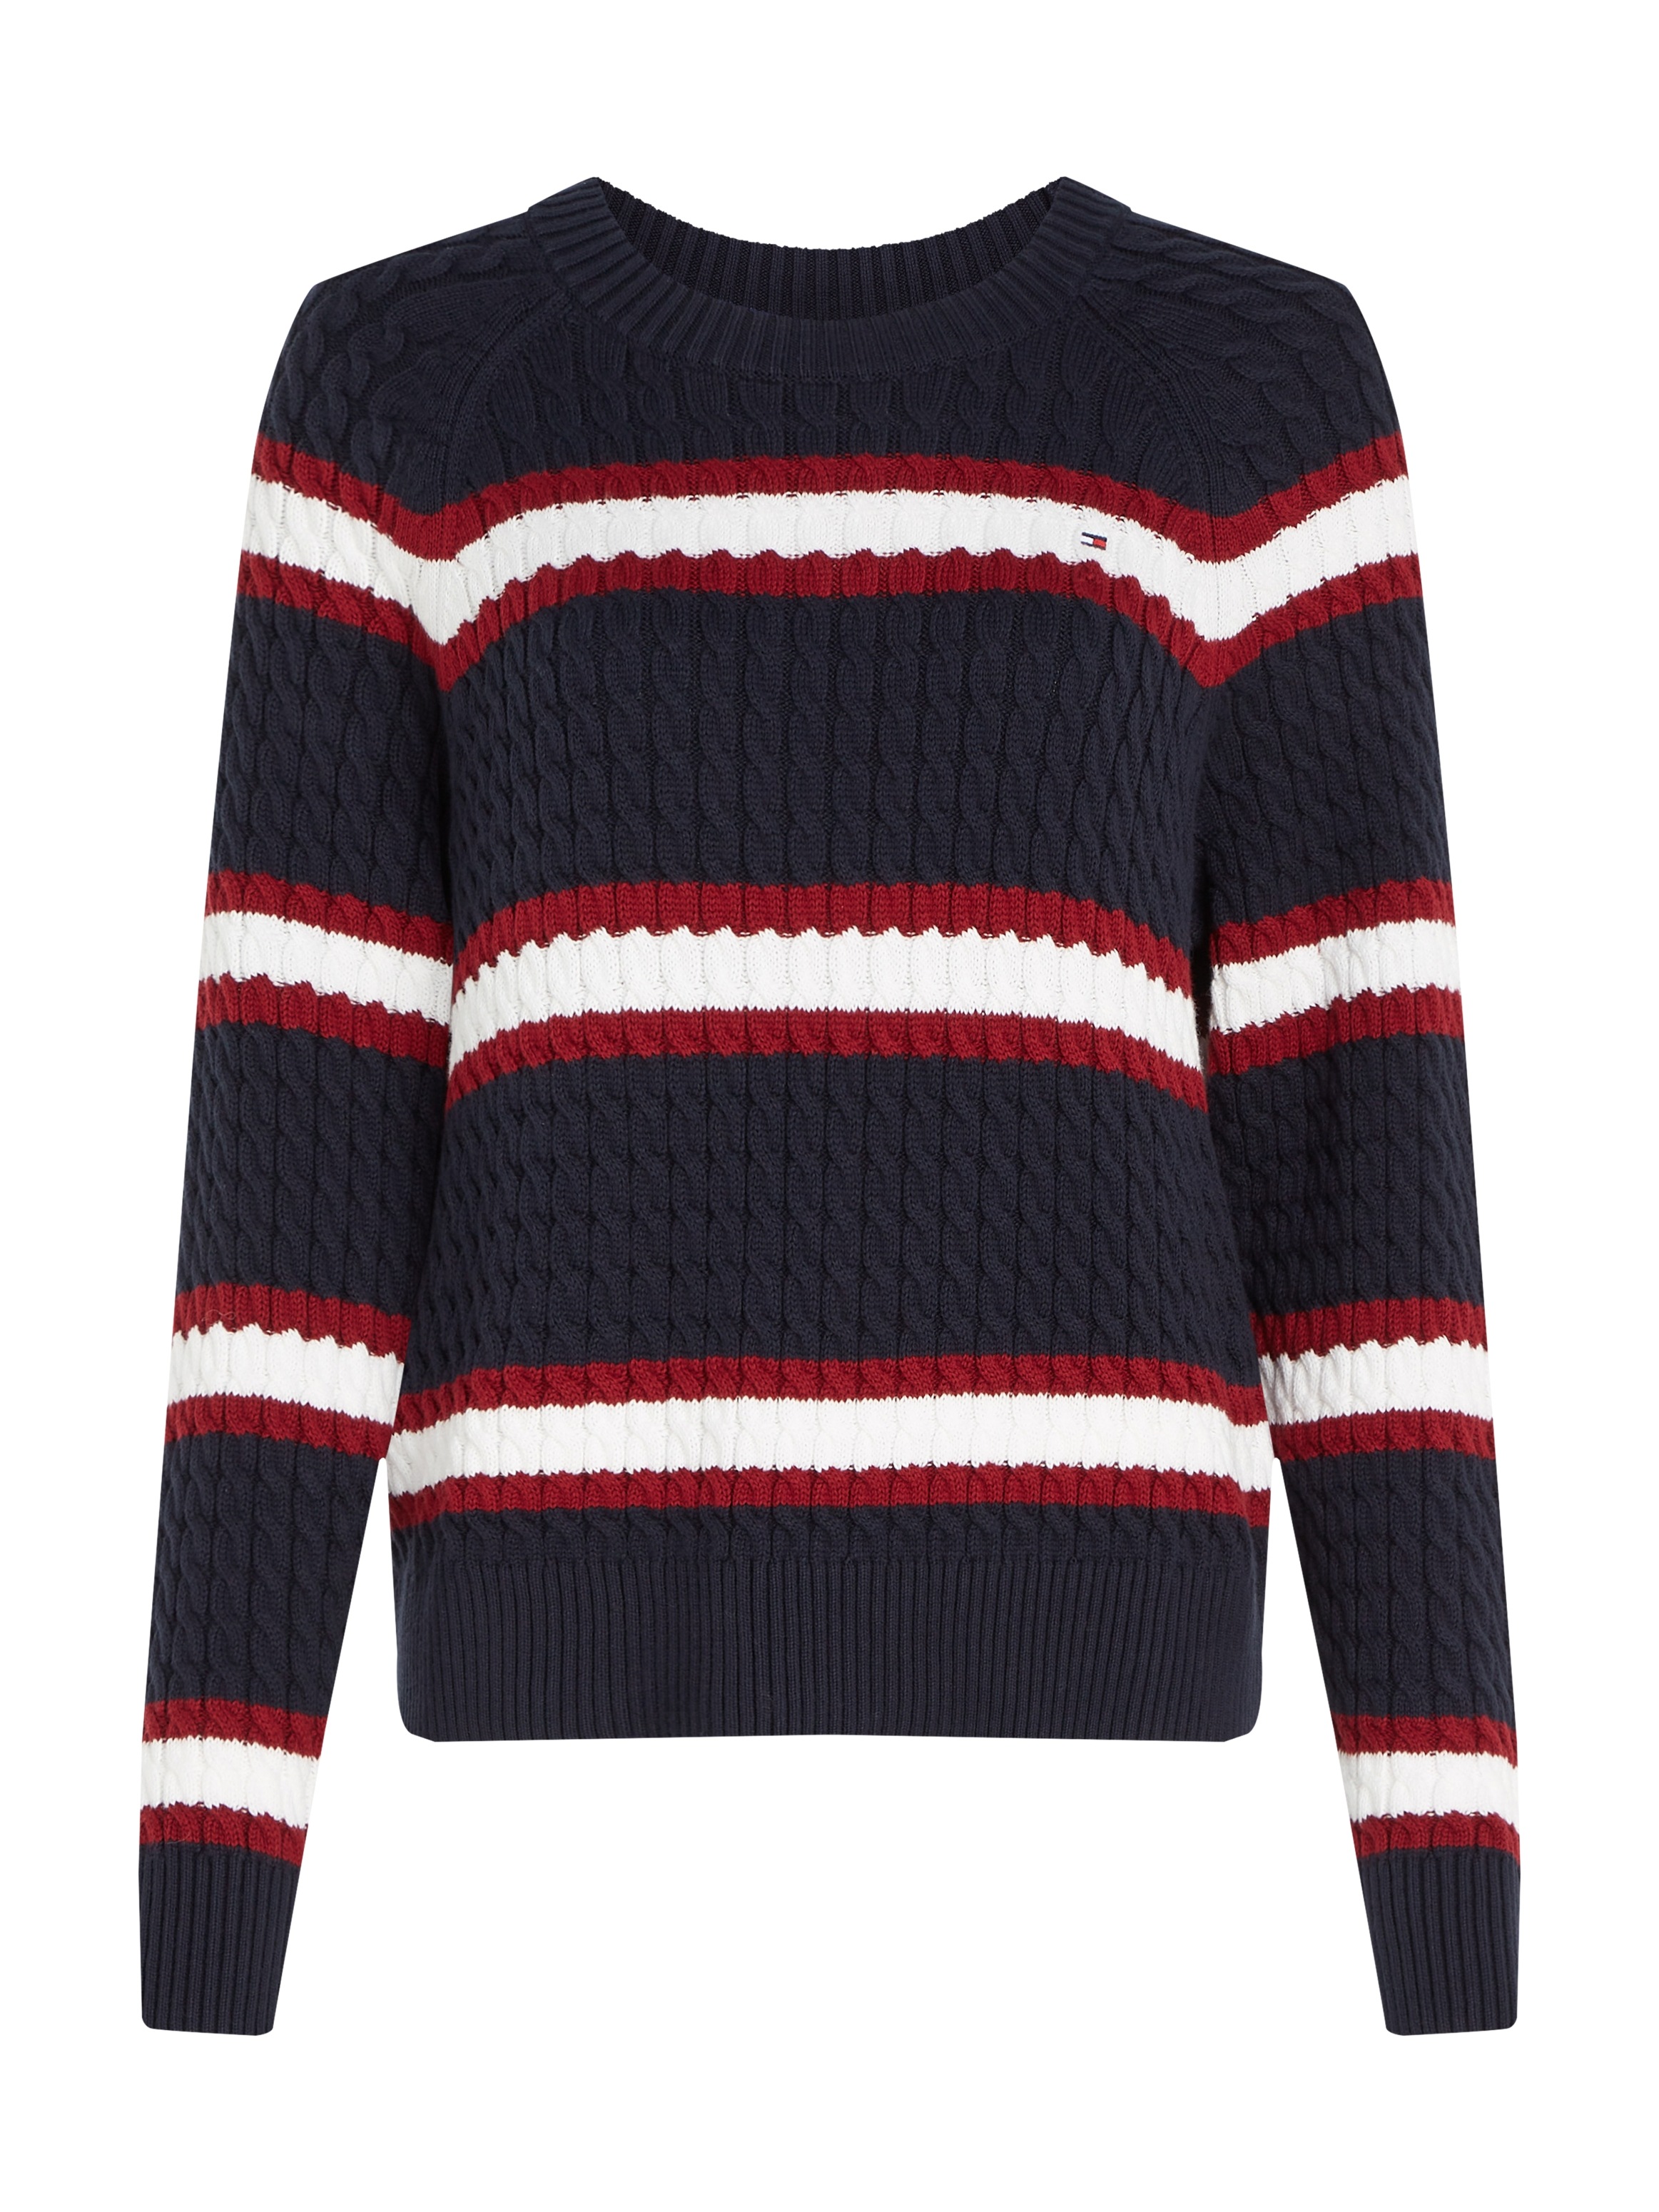 Tommy Hilfiger Strickpullover »CO OTTOversand CABLE C-NECK Logostickerei SWEATER«, MINI bei mit